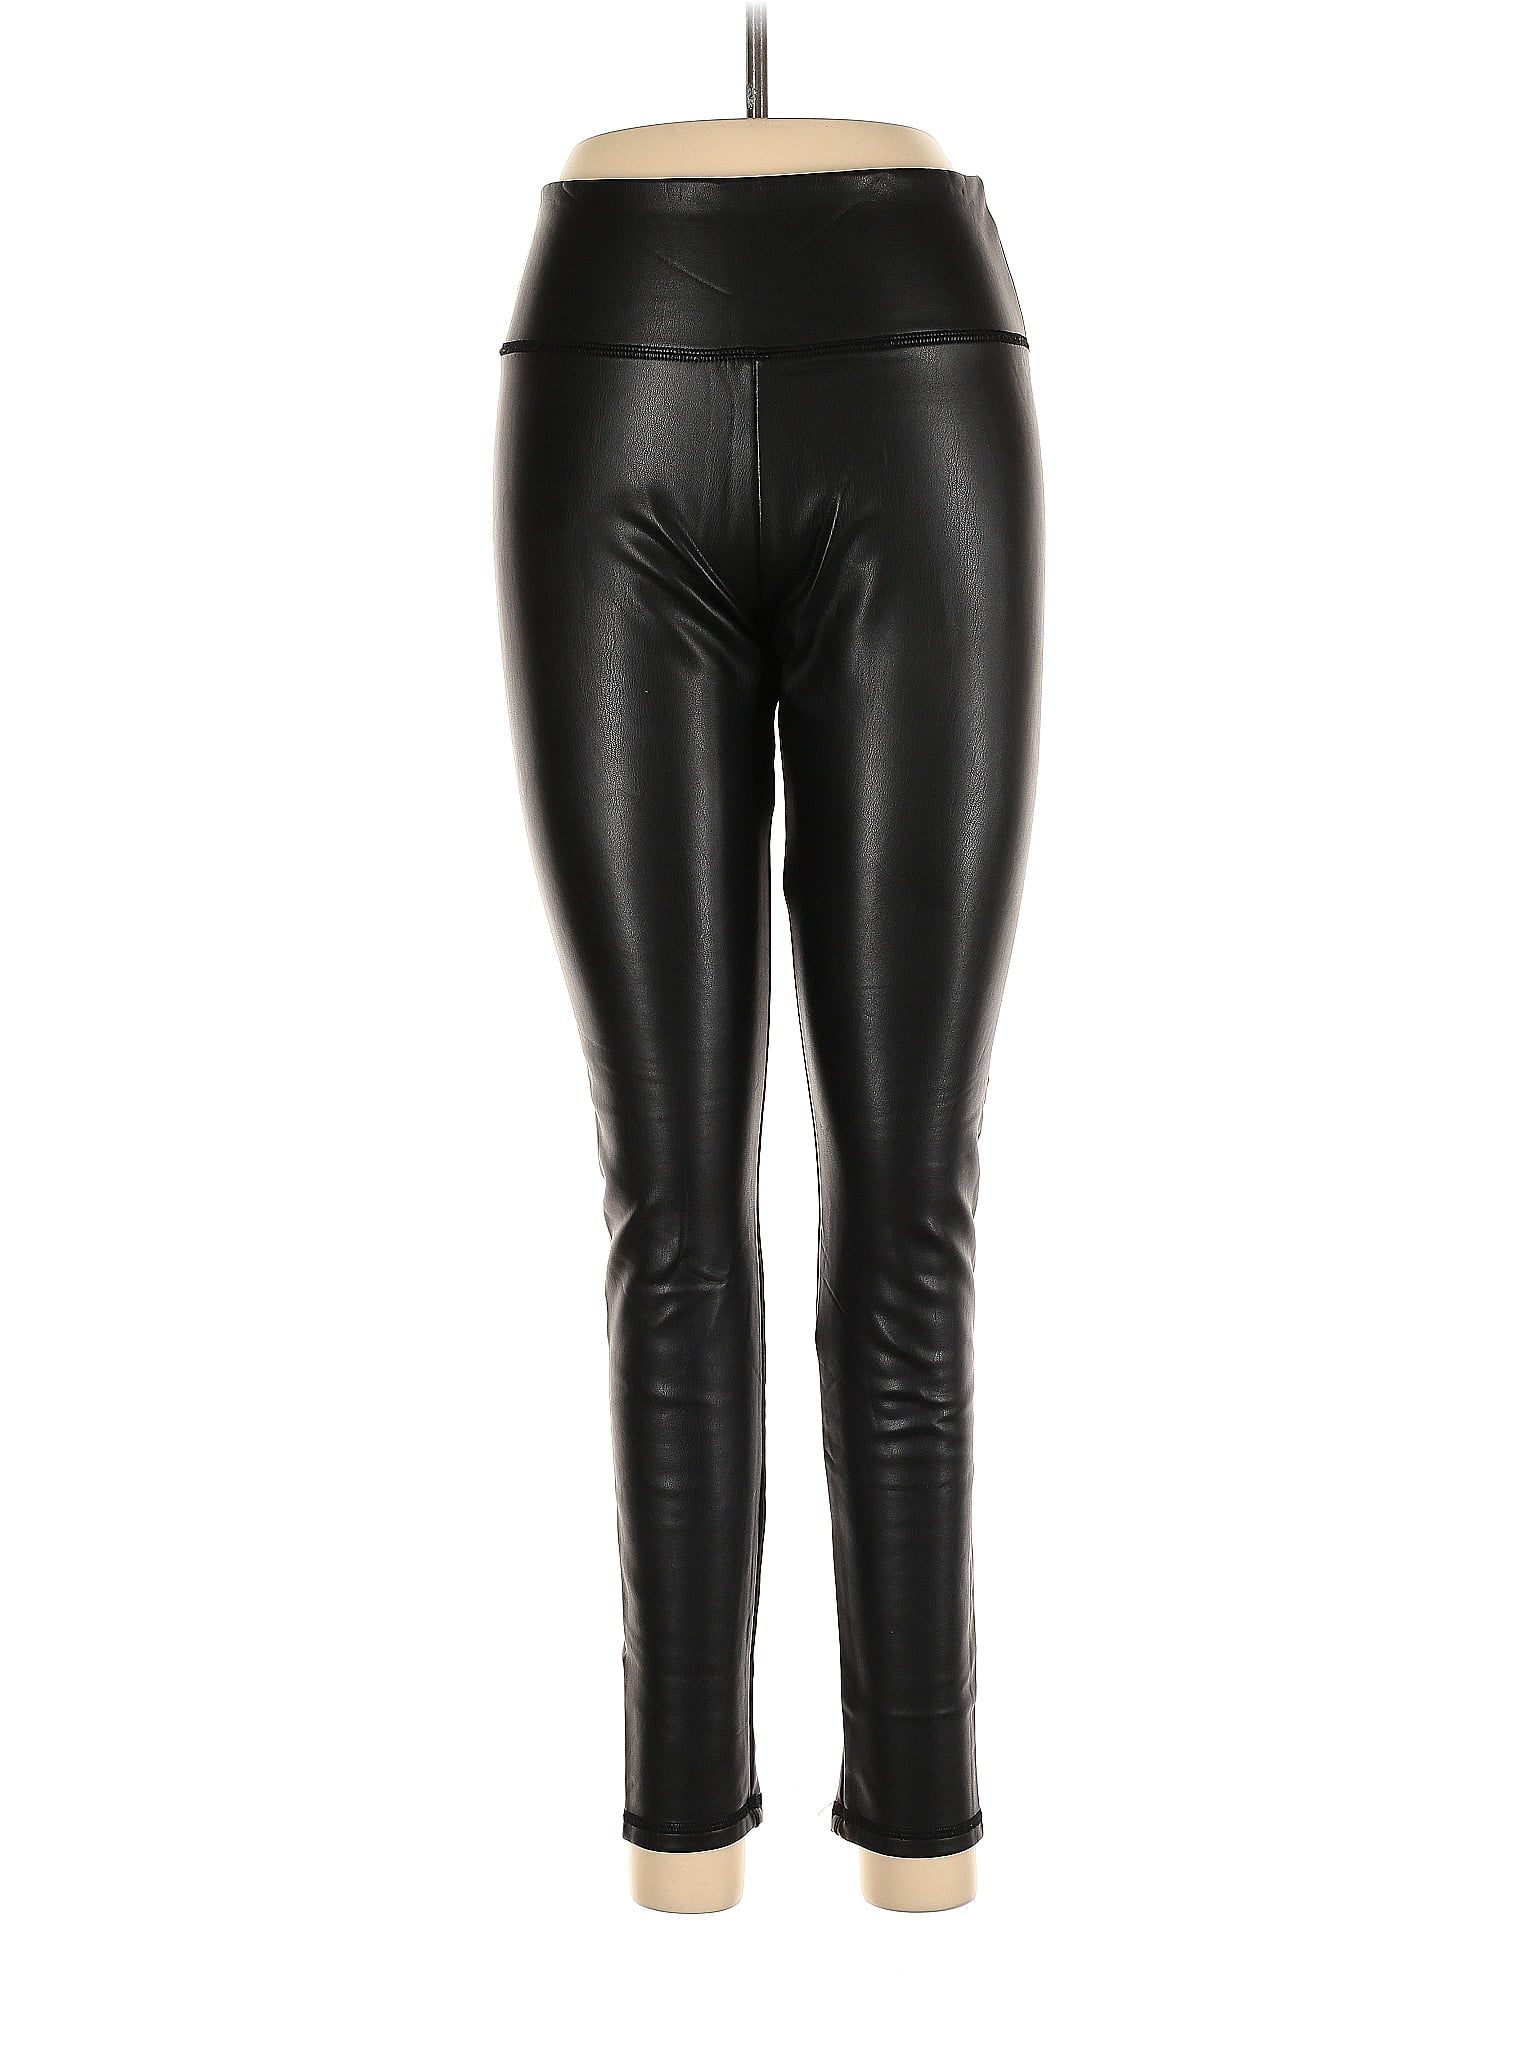 Hollister Leather Pants Black Size 4 - $15 (75% Off Retail) - From